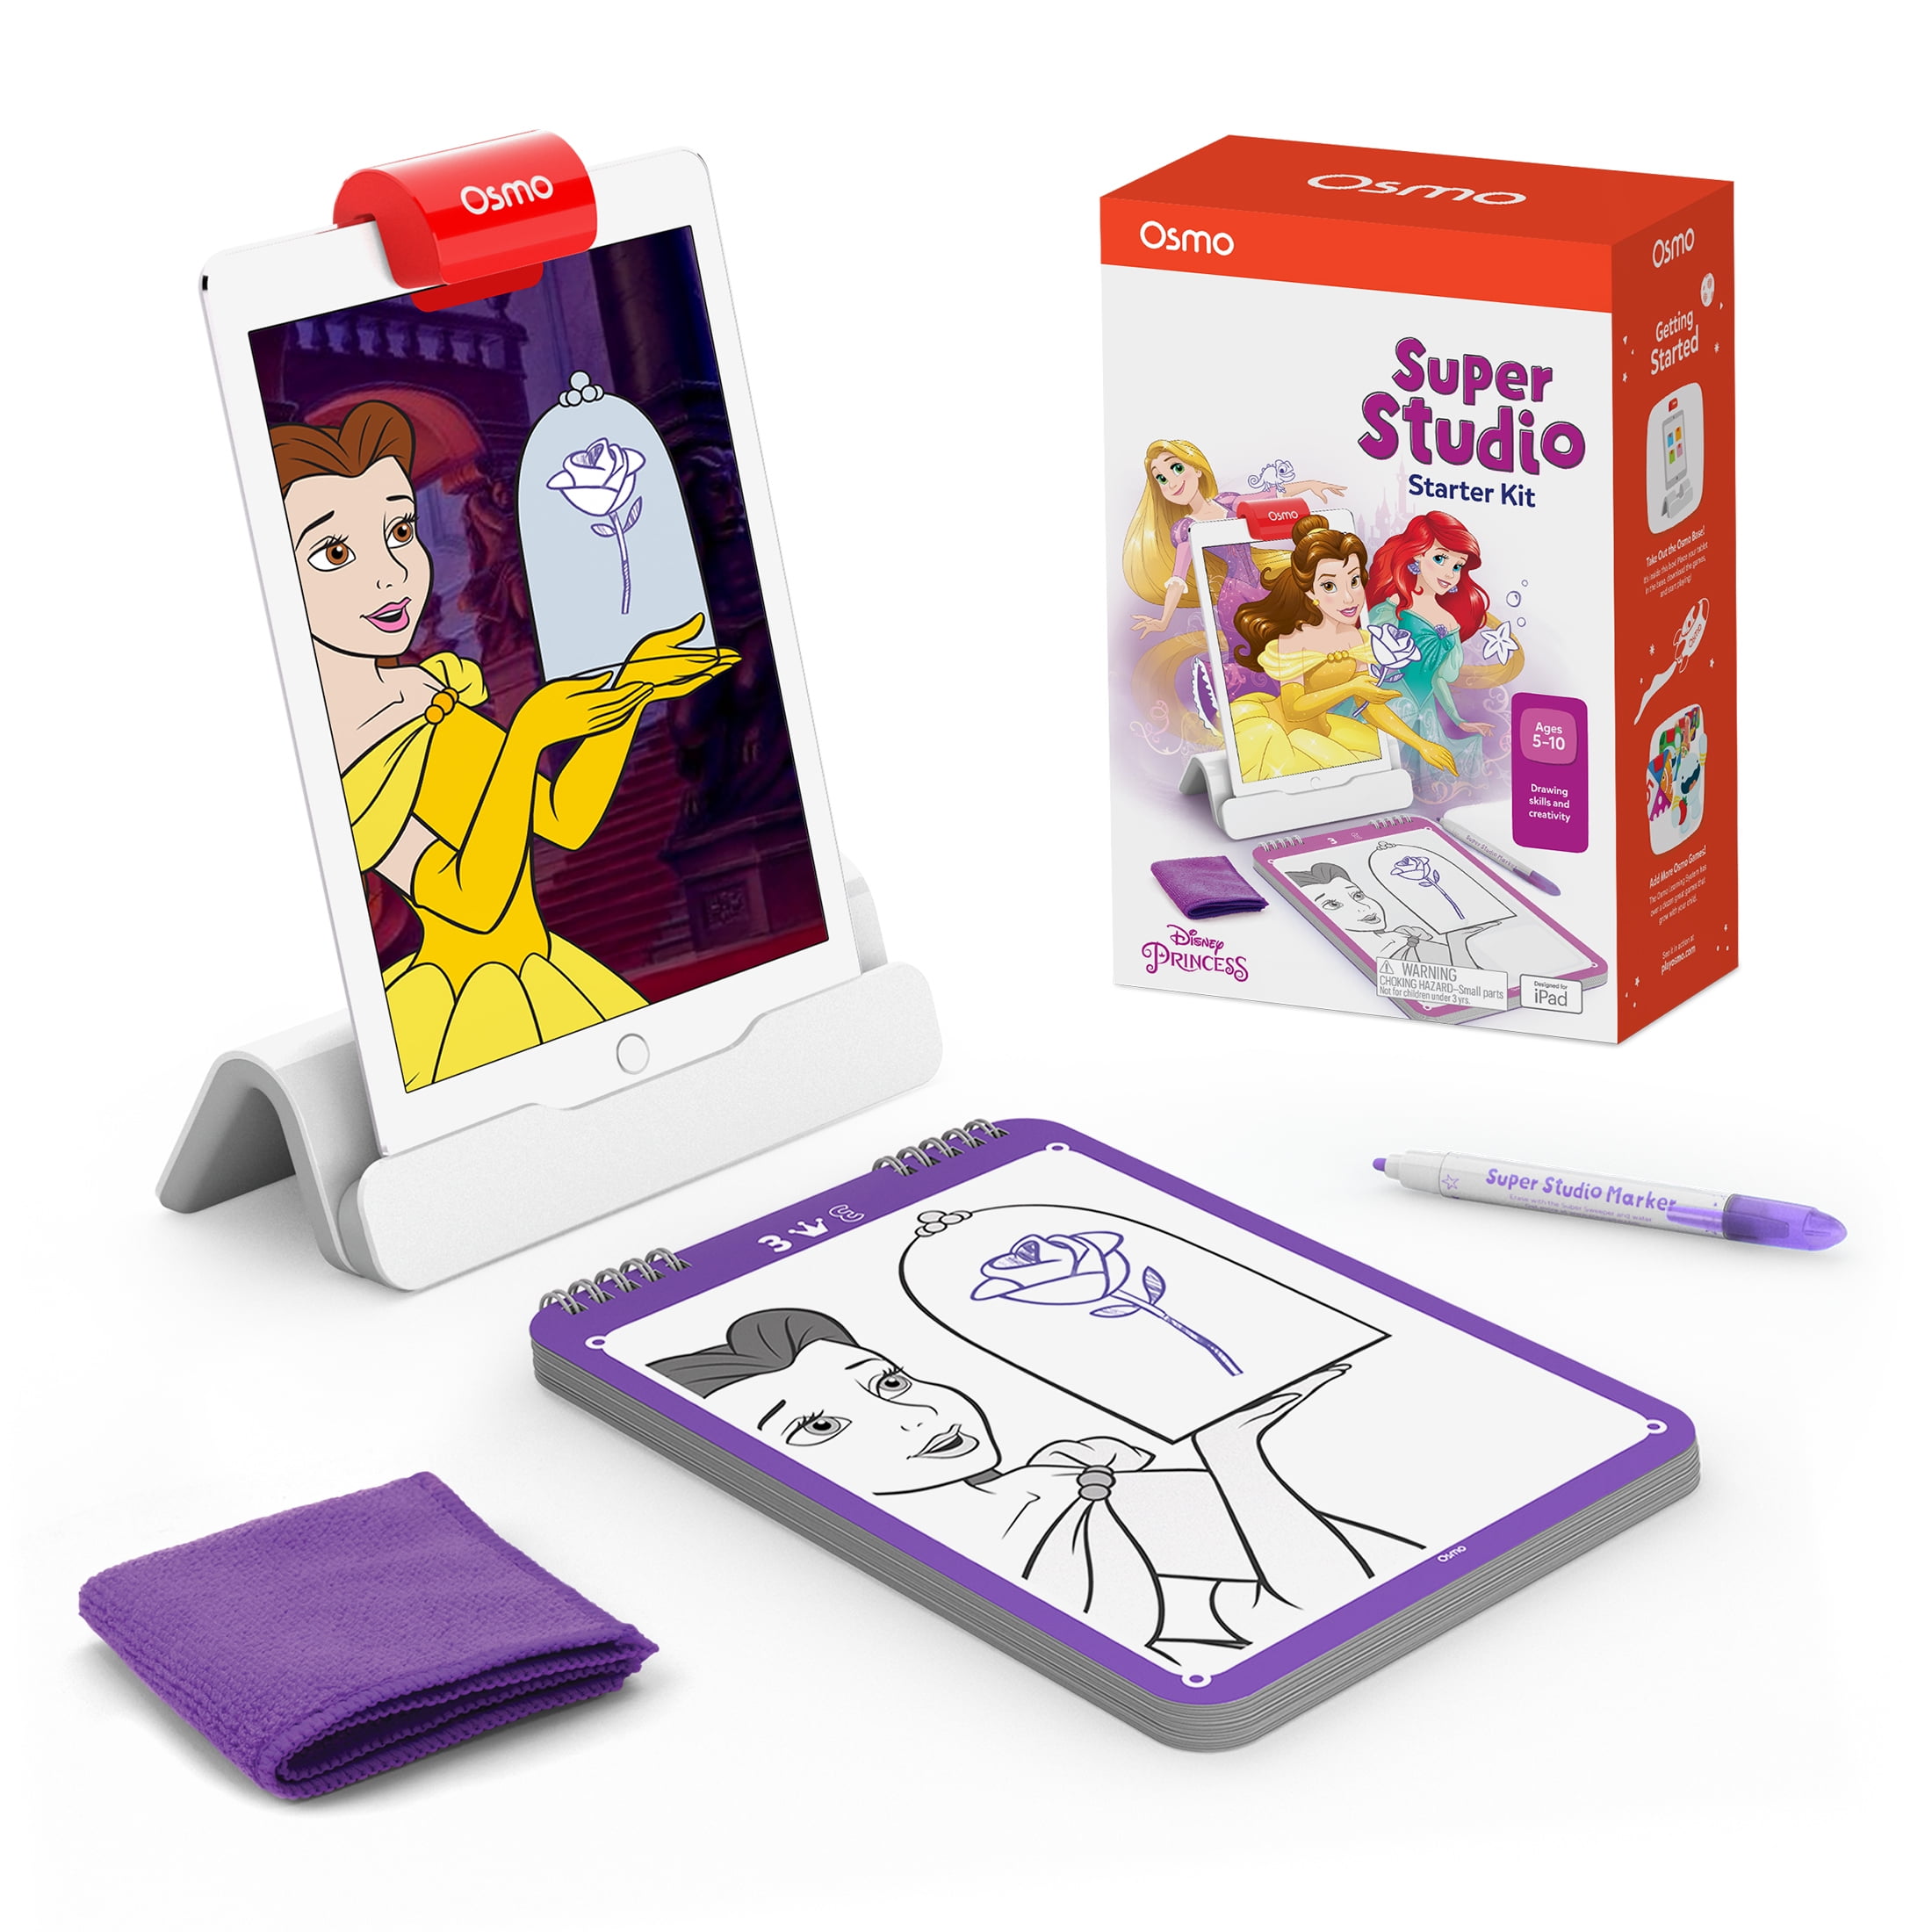 iPad Base Included Osmo Ages 5-11 Creative Starter Kit for iPad + Super Studio Disney Princess Game Bundle Ages 5-10 